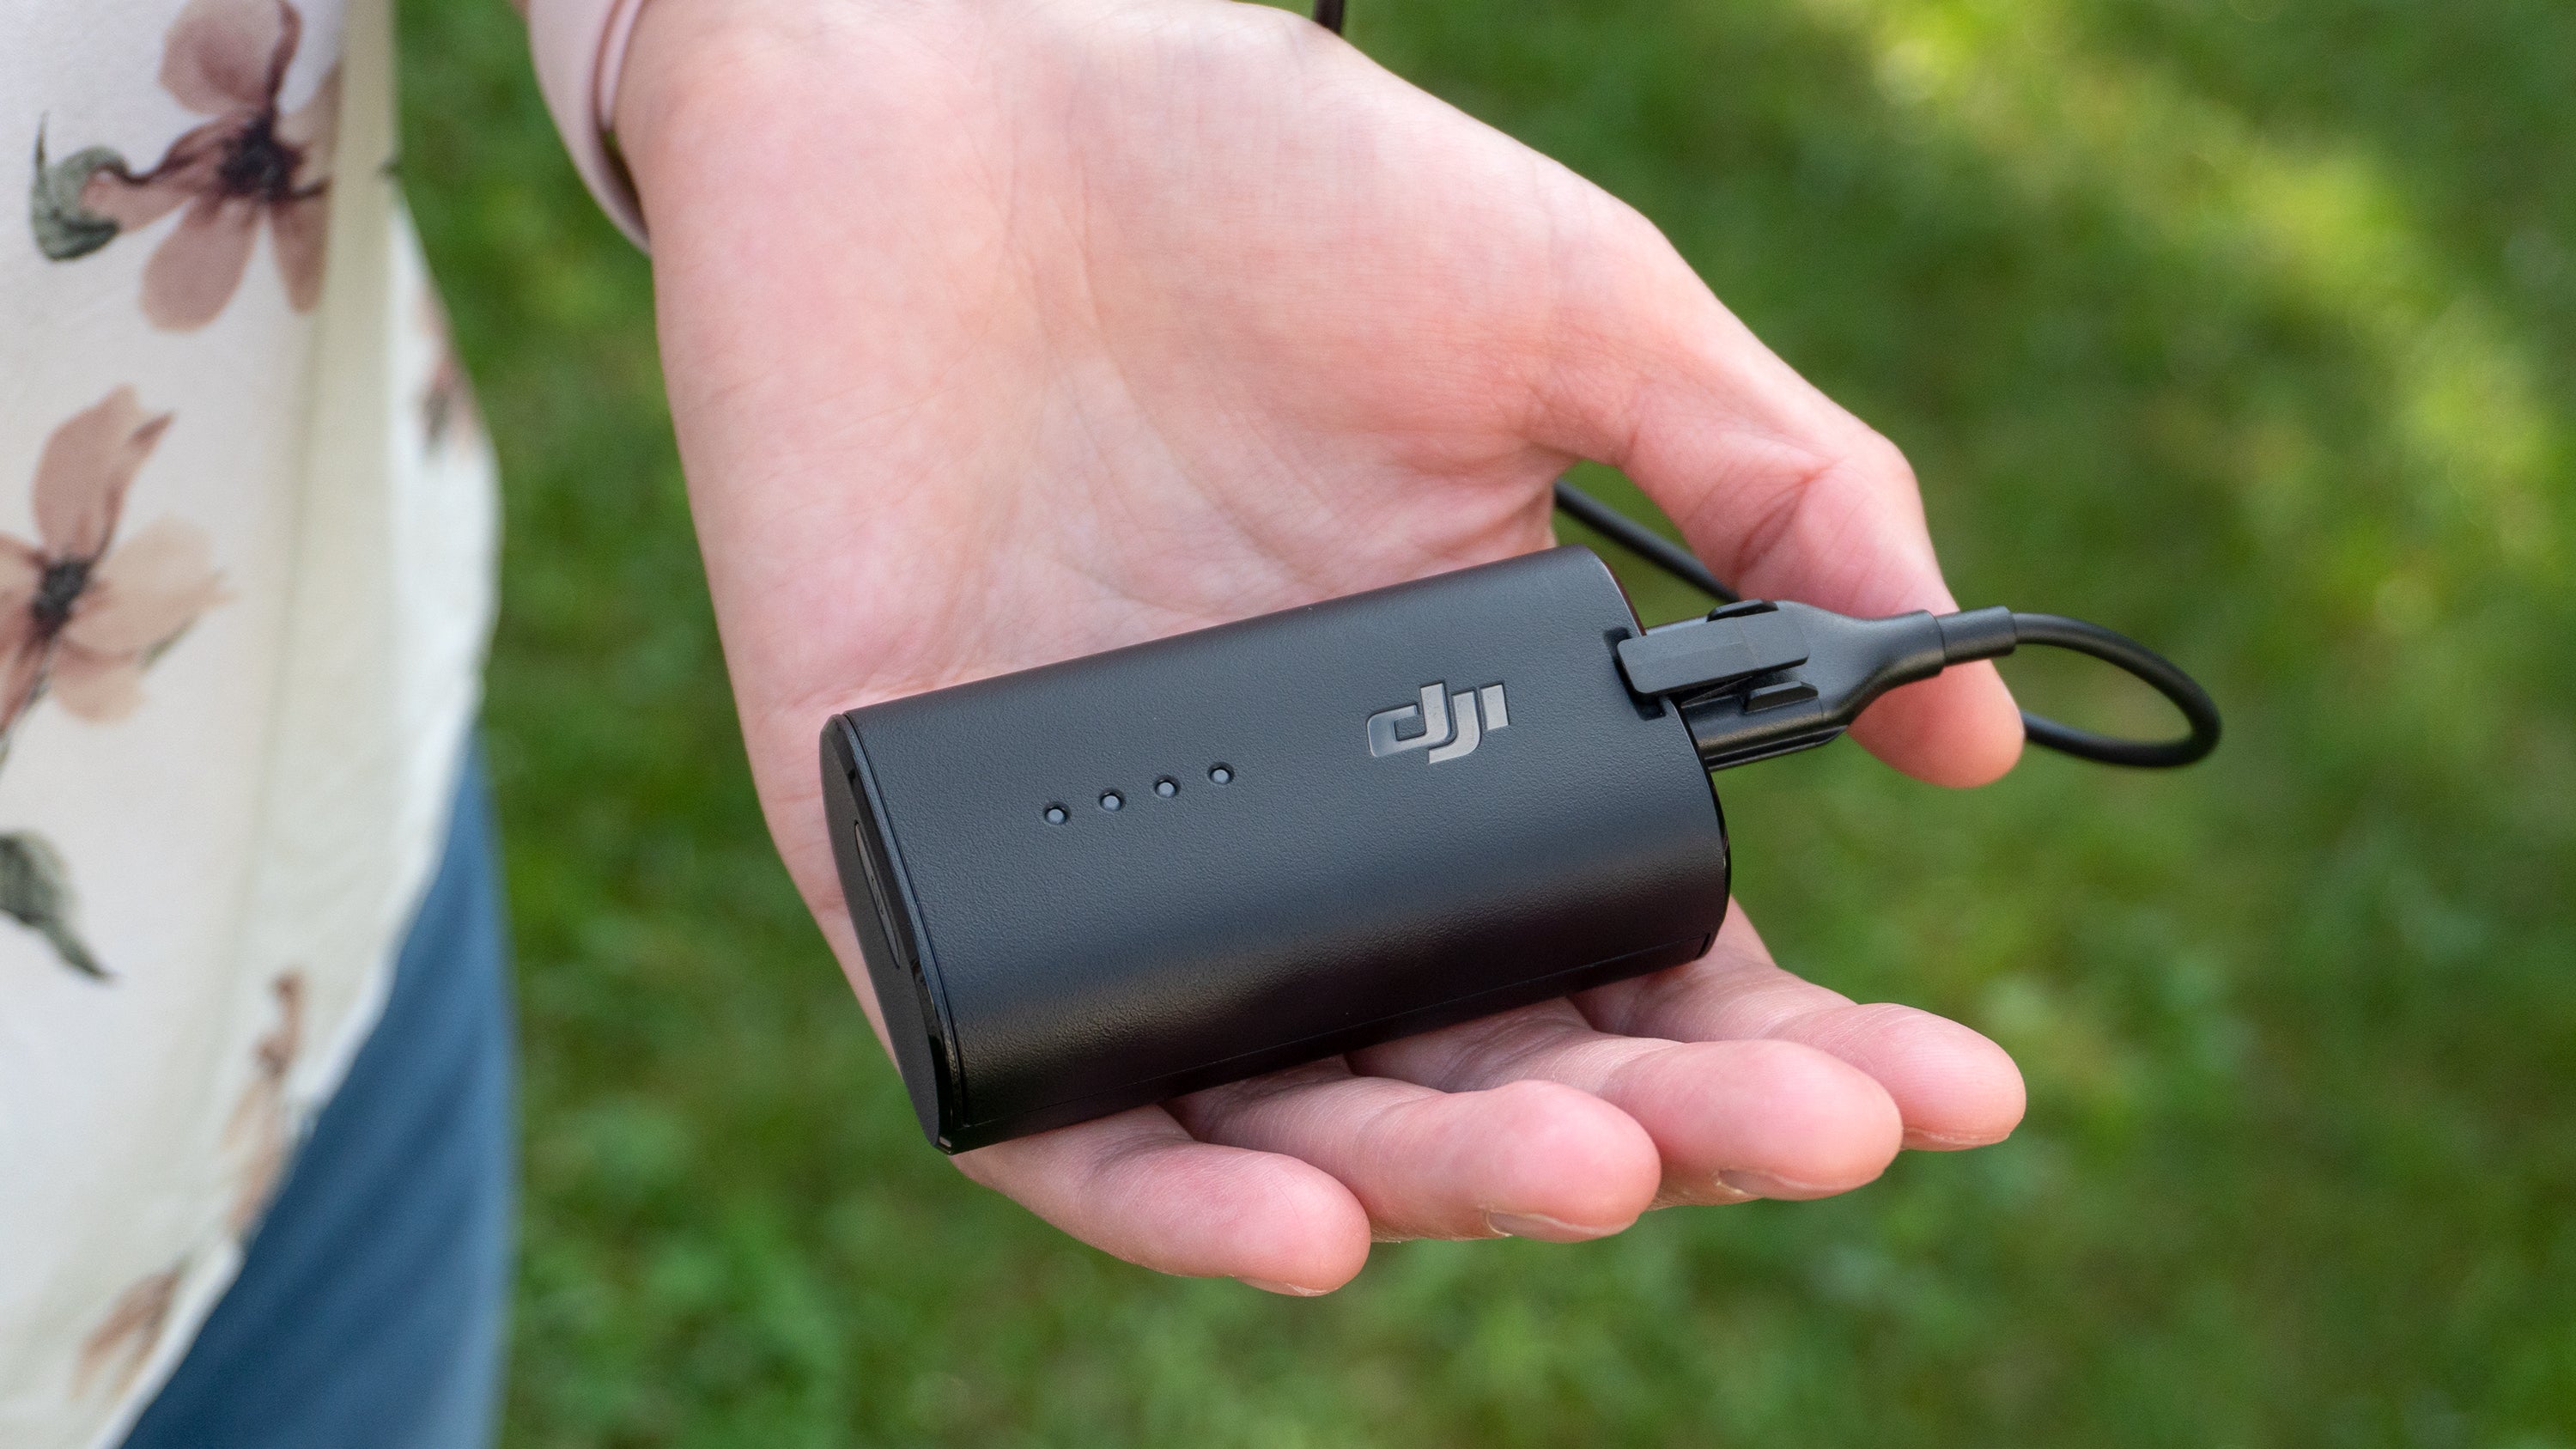 To keep the size and weight of the DJI Goggles 2 down, the battery pack is external and connects to the headset with a wire. (Photo: Andrew Liszewski | Gizmodo)